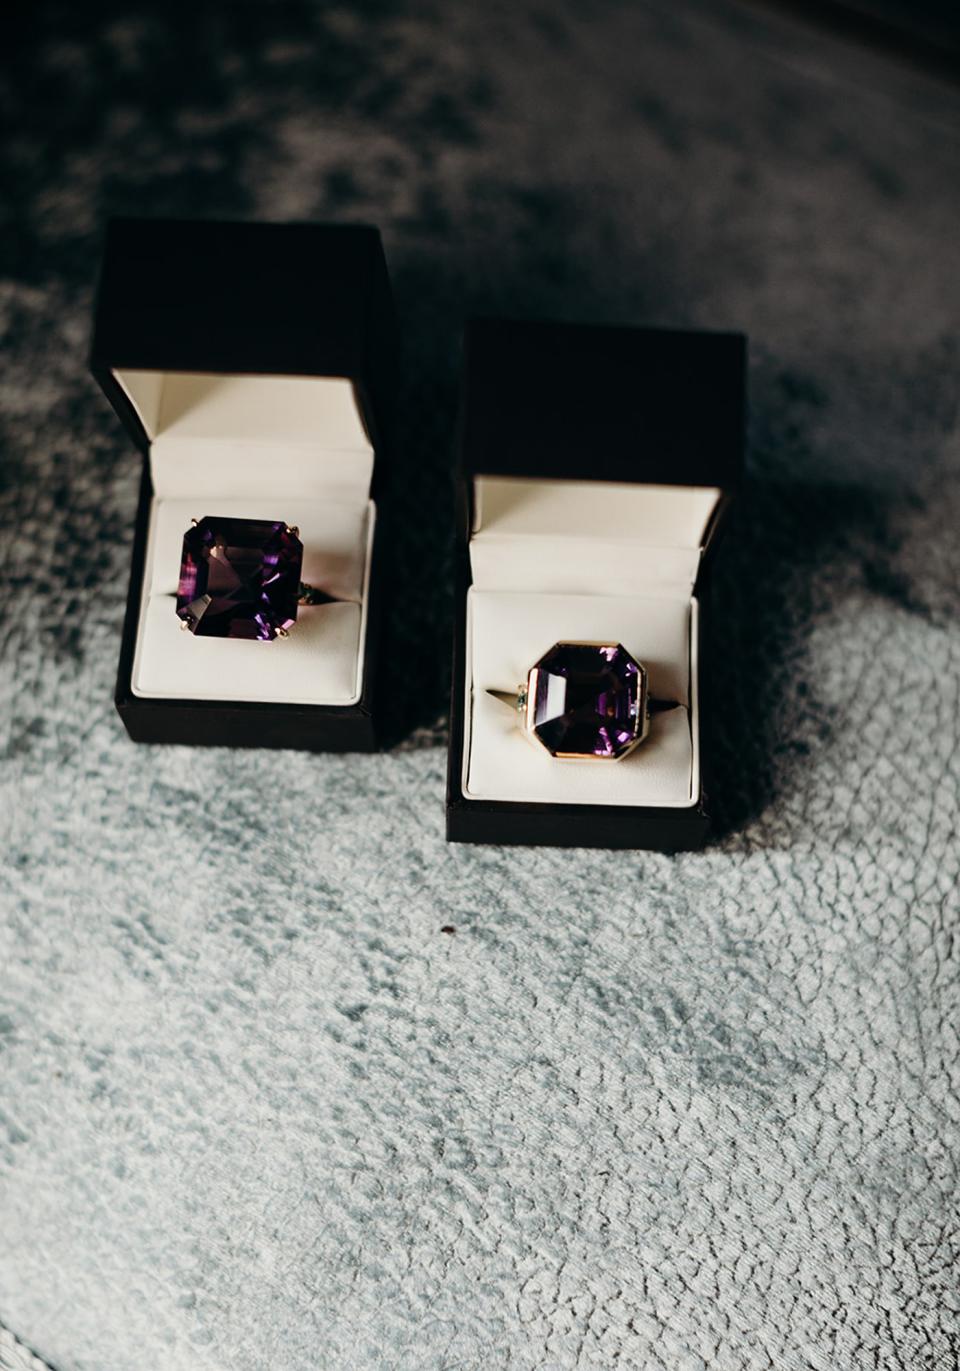 The couple’s matching custom Mardi Gras rings were fun accessories designed by Kyle Chan that they wore in addition to their wedding rings.